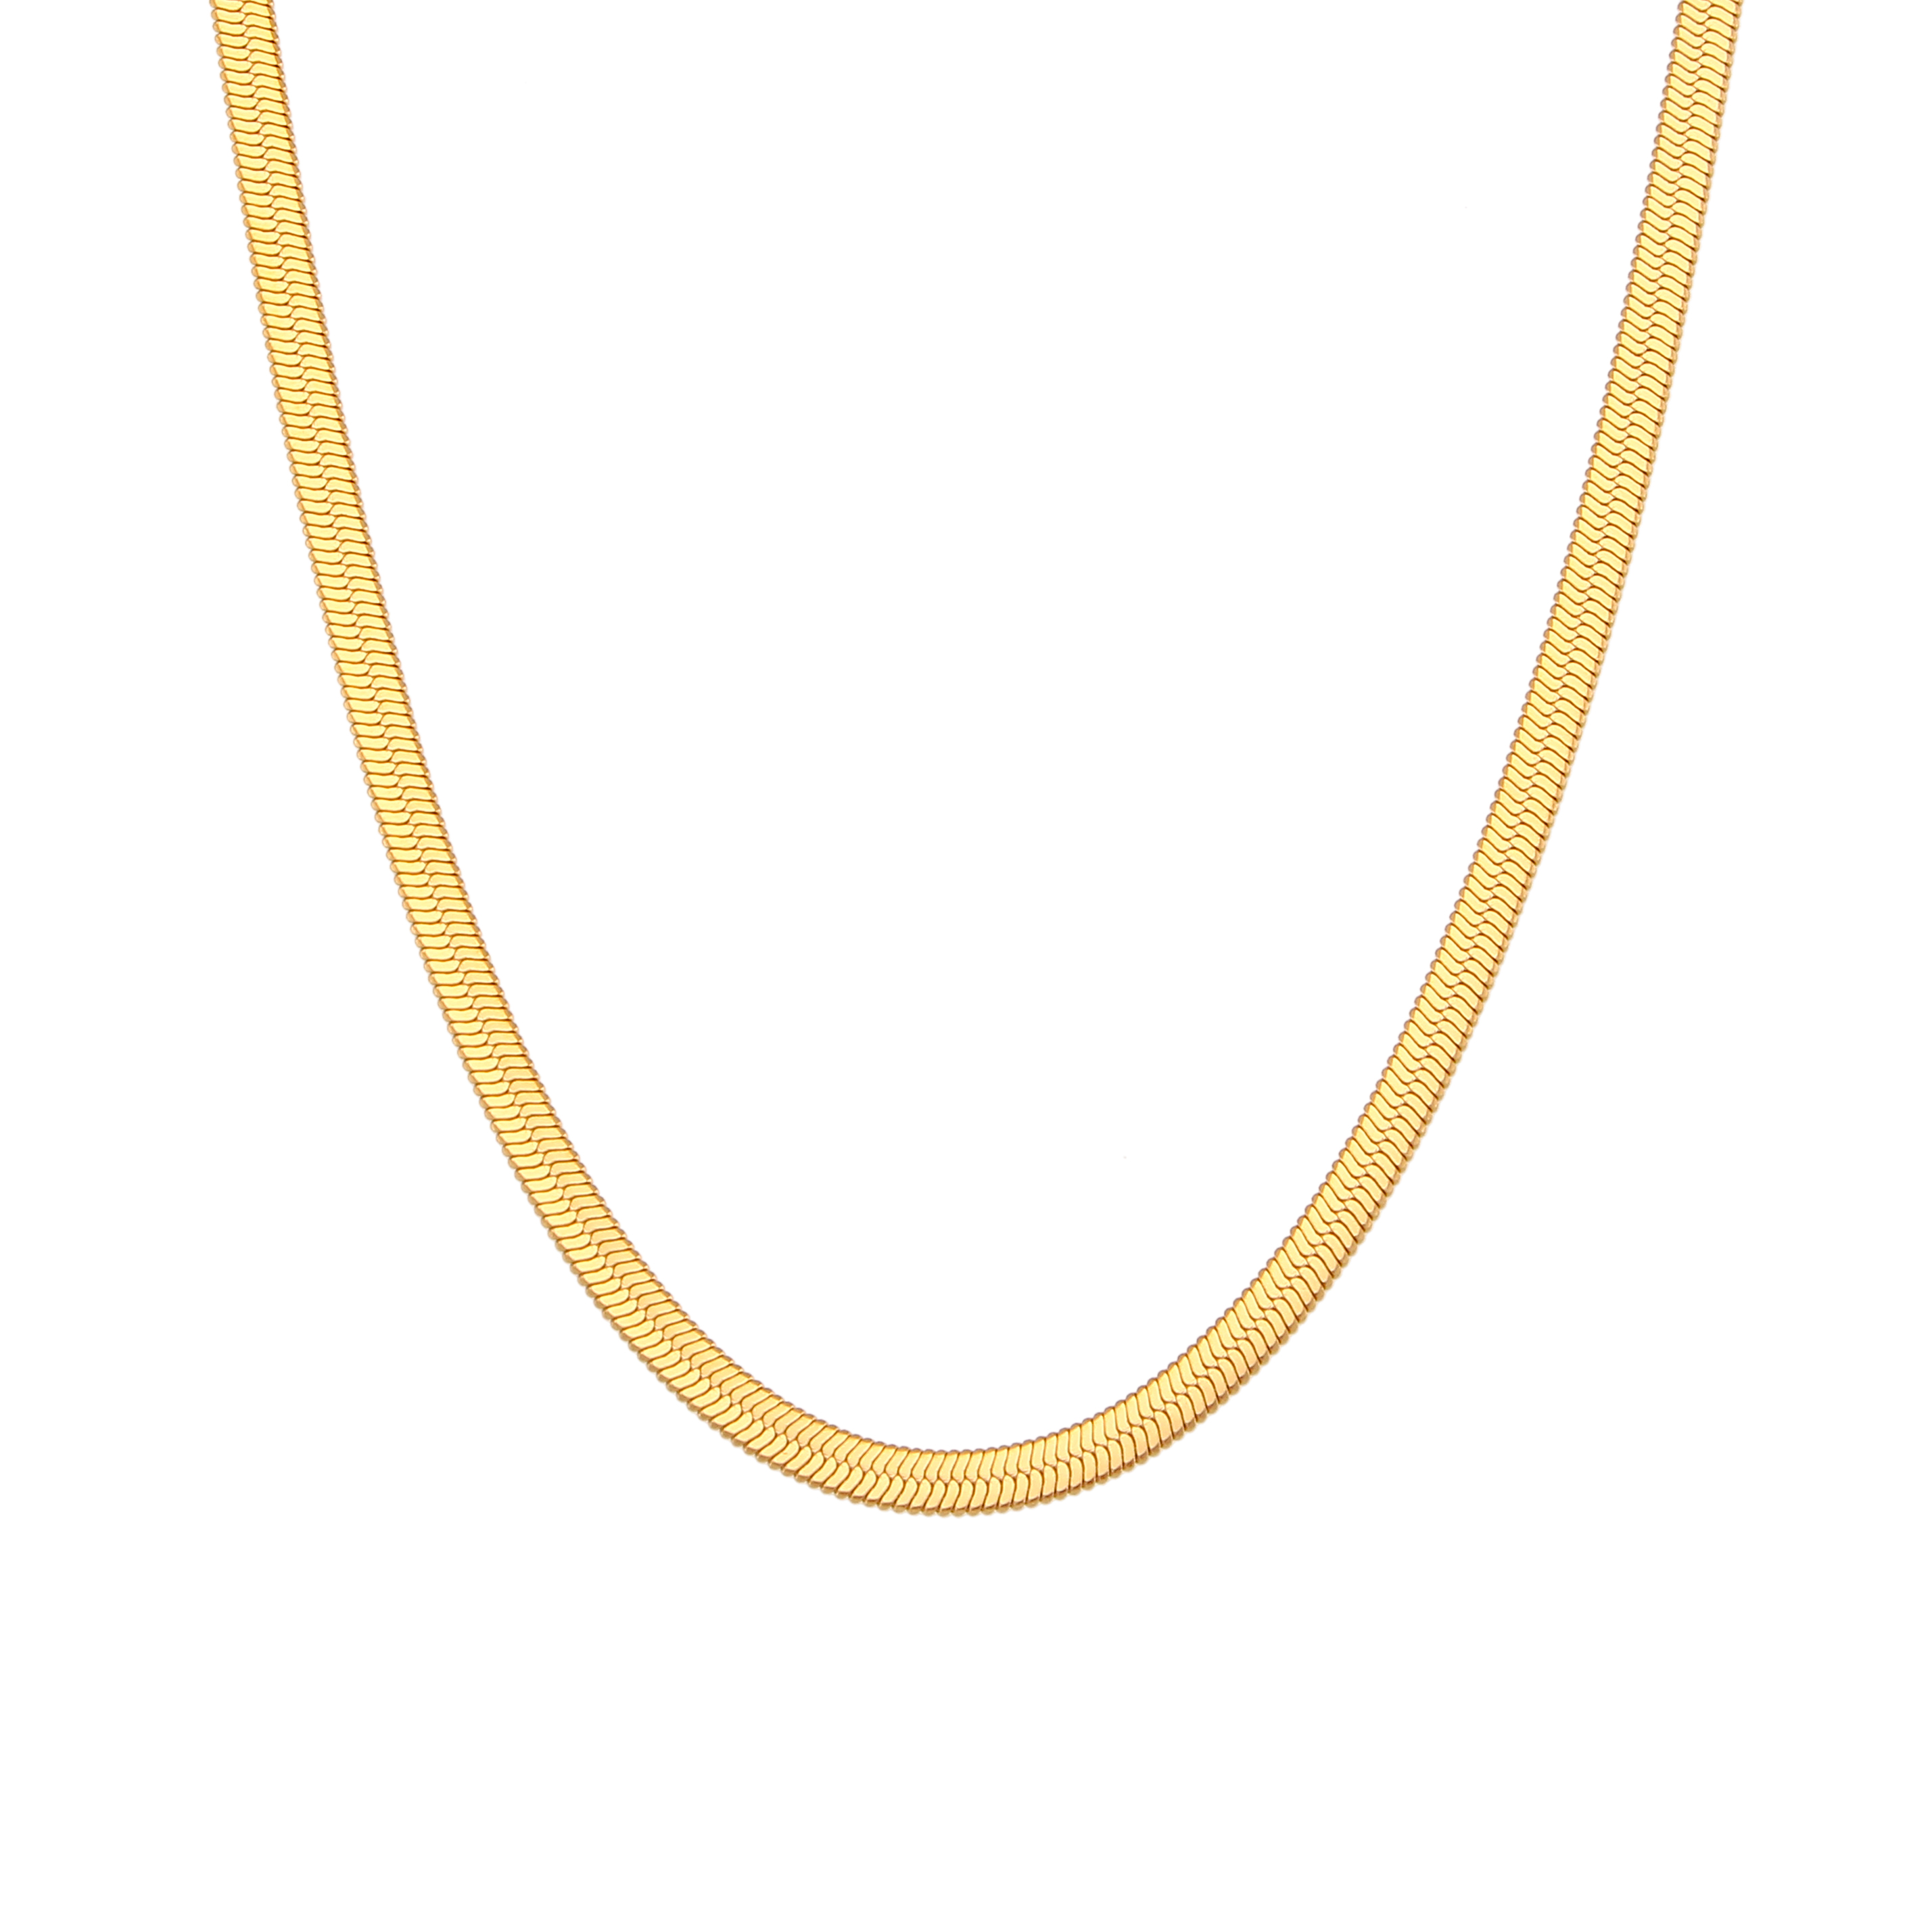 Steel Necklaces Steel Necklace - 4 mm Herryingbone - 32+6 cm, 38+4 cm, 42 cm and 48 cm - Colour Gold